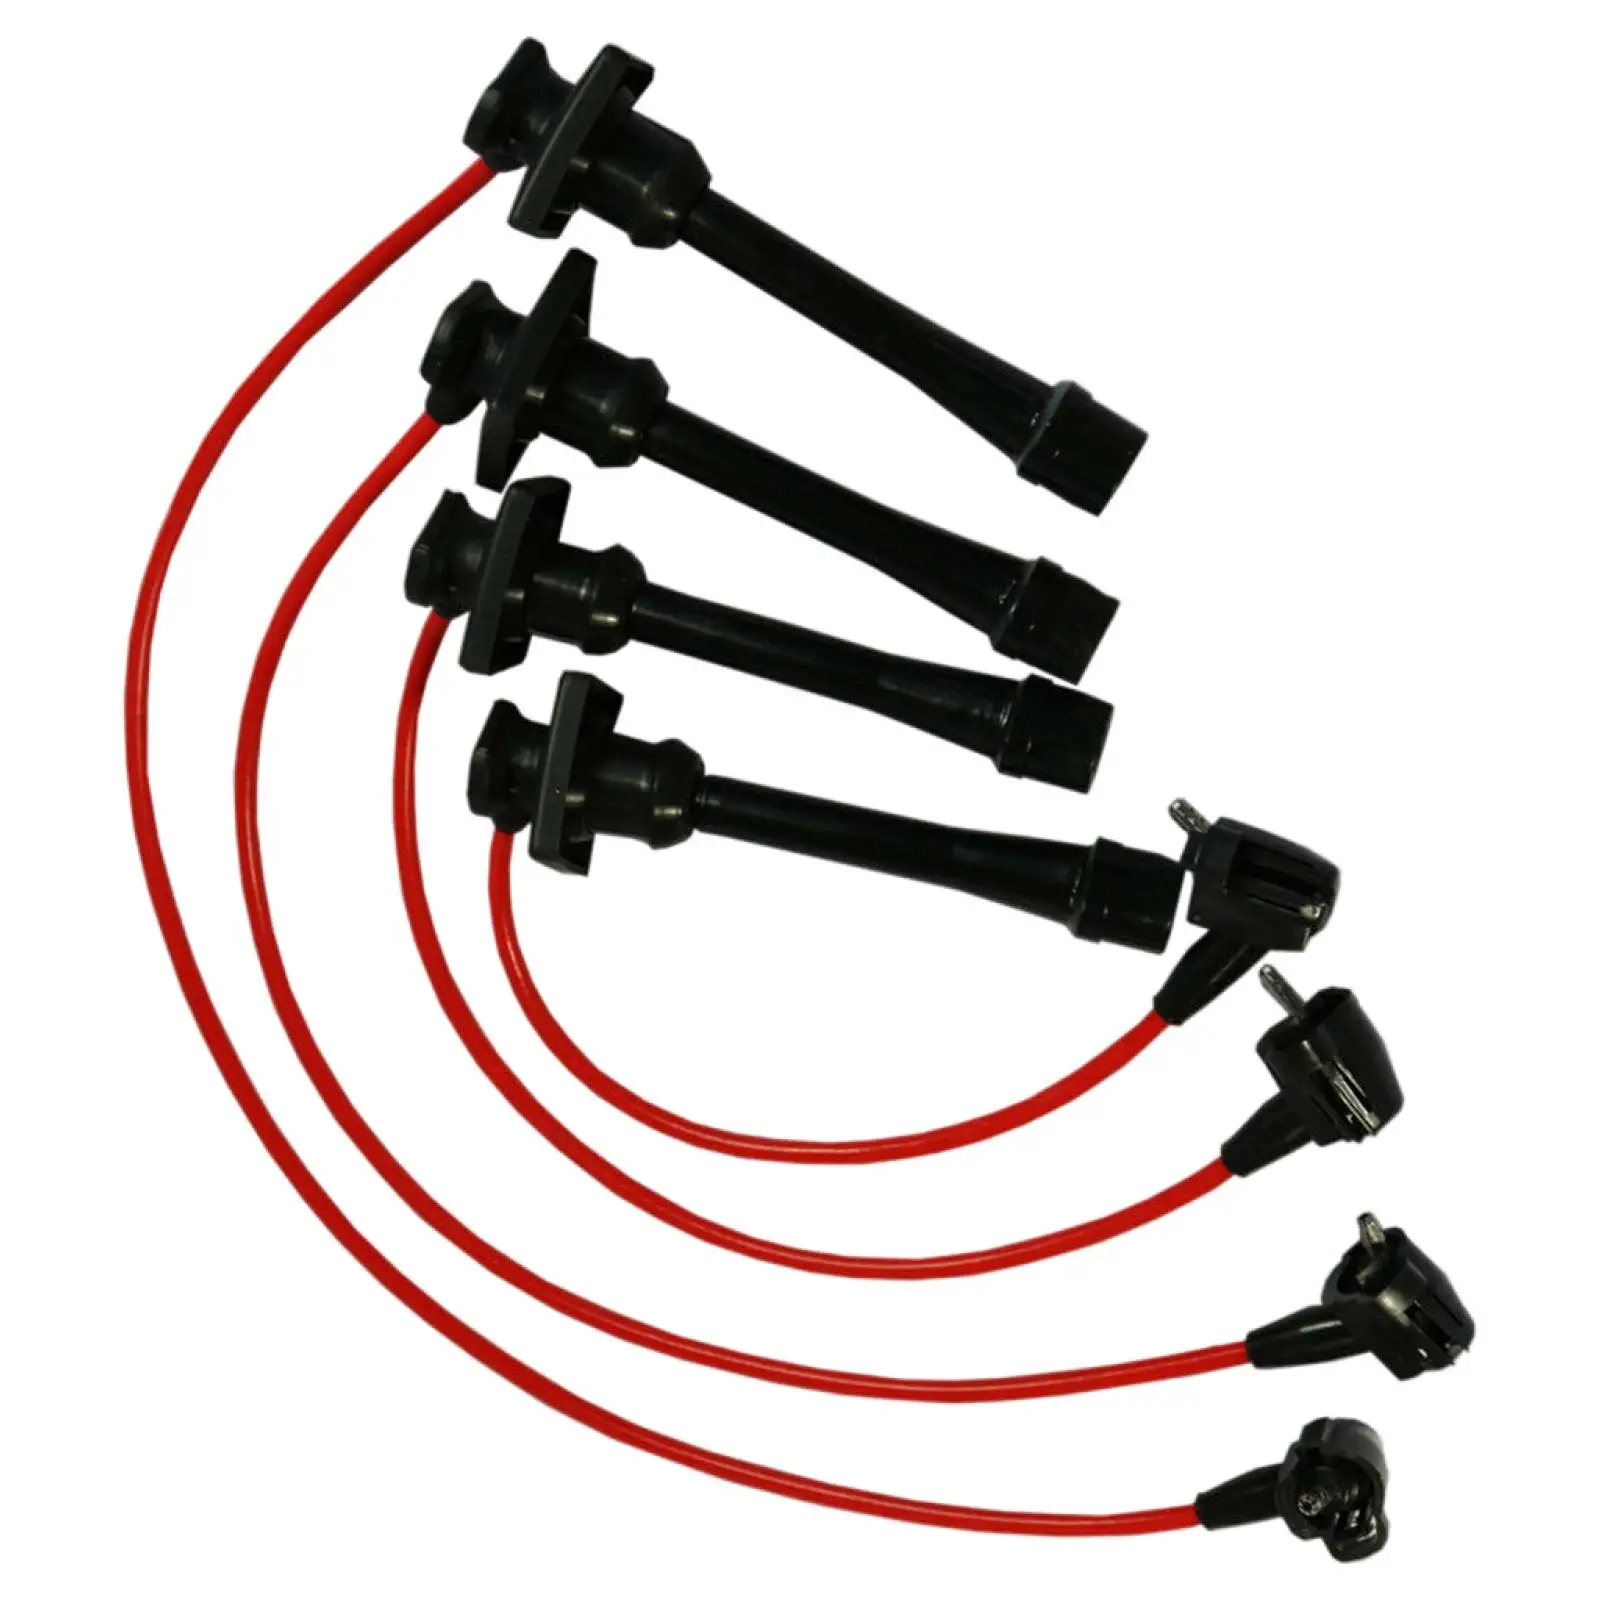 4x Spark Plug Wires 90919-22327 Ignition Cables for toyota for 93-97 Heavy Duty Silicone Boots 9091922327